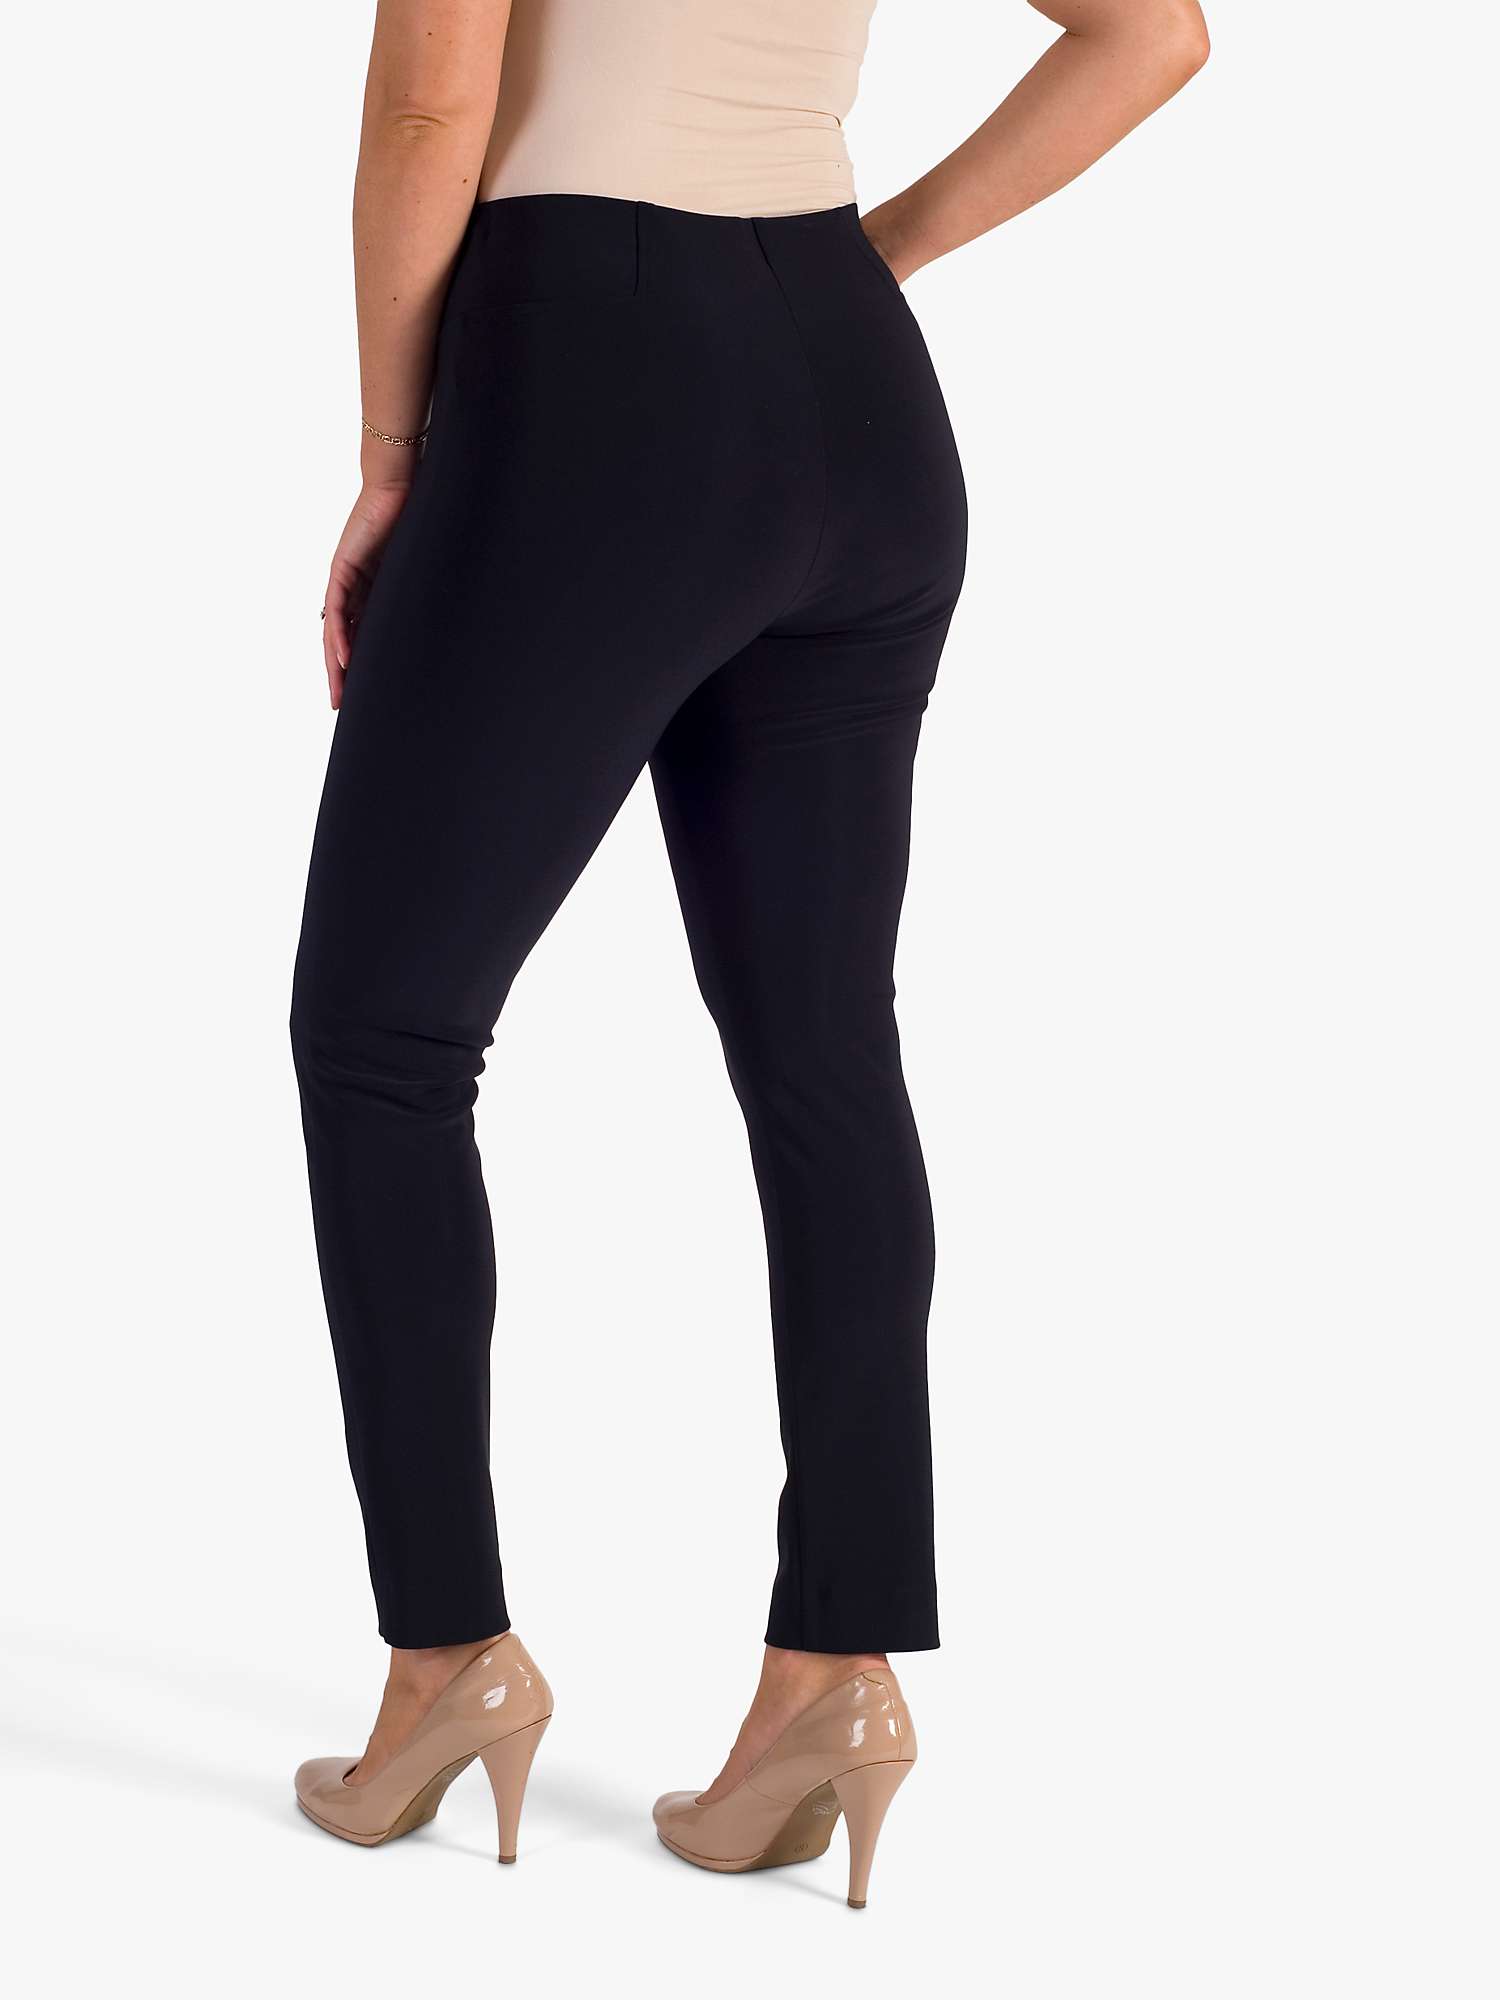 Buy Chesca Side Slit Bonded Jersey Trousers, Navy Online at johnlewis.com